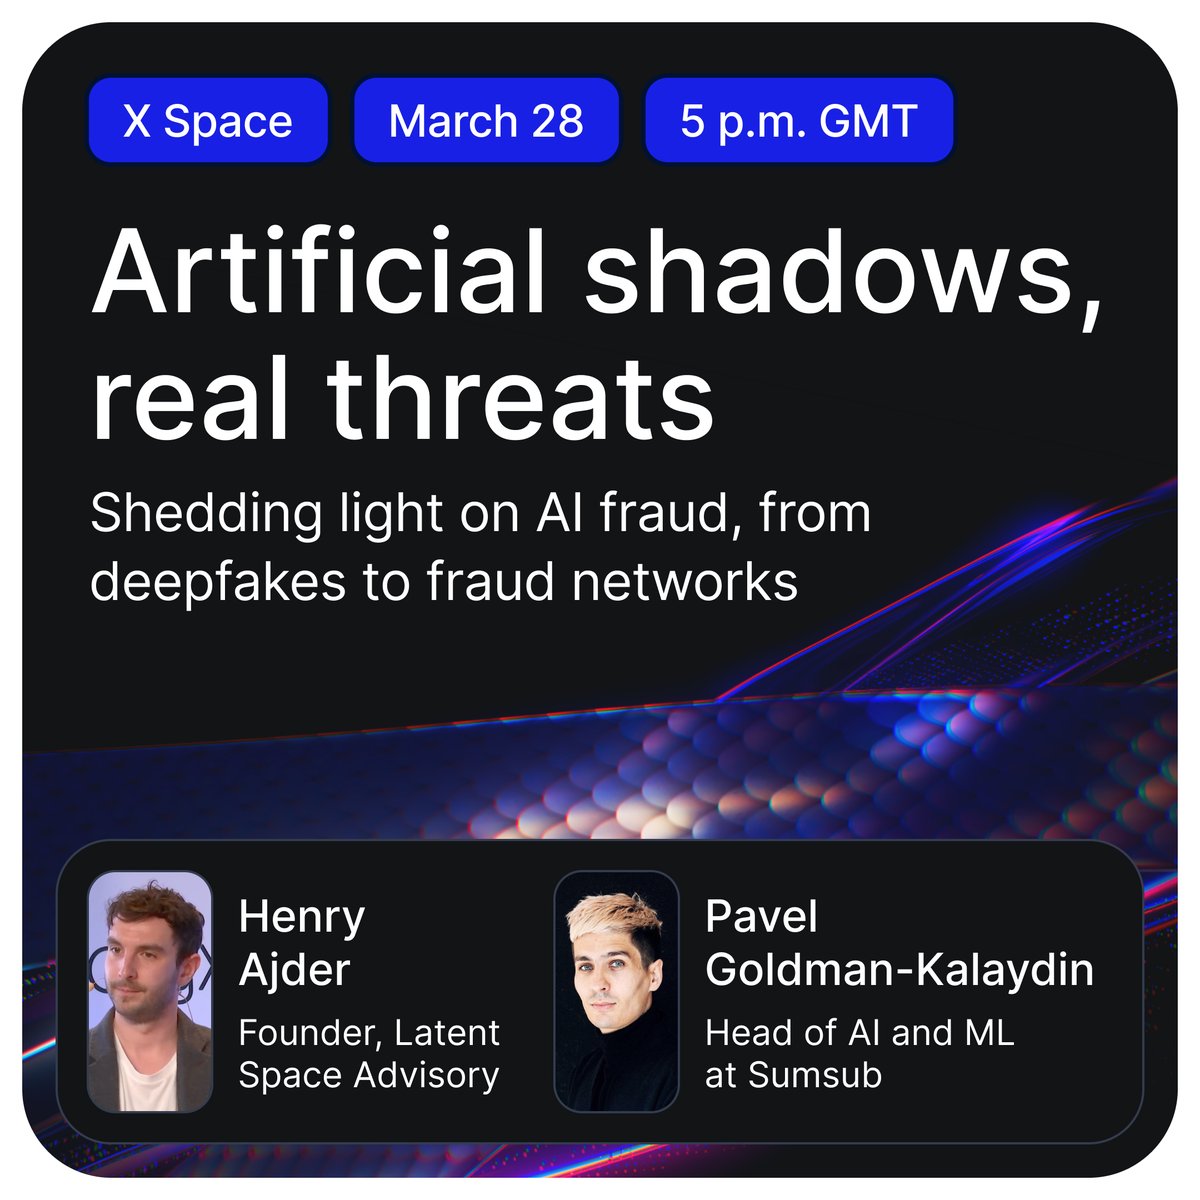 In just two days, we’ll meet with @HenryAjder and Pavel Goldman-Kalaydin to discuss deepfakes and AI fraud—topics that are making waves in the news cycle these days 🔗 twitter.com/i/spaces/1vOxw… Join our X Space at 5 p.m. UK time to delve #deepfakes, AI, and fraud networks.…